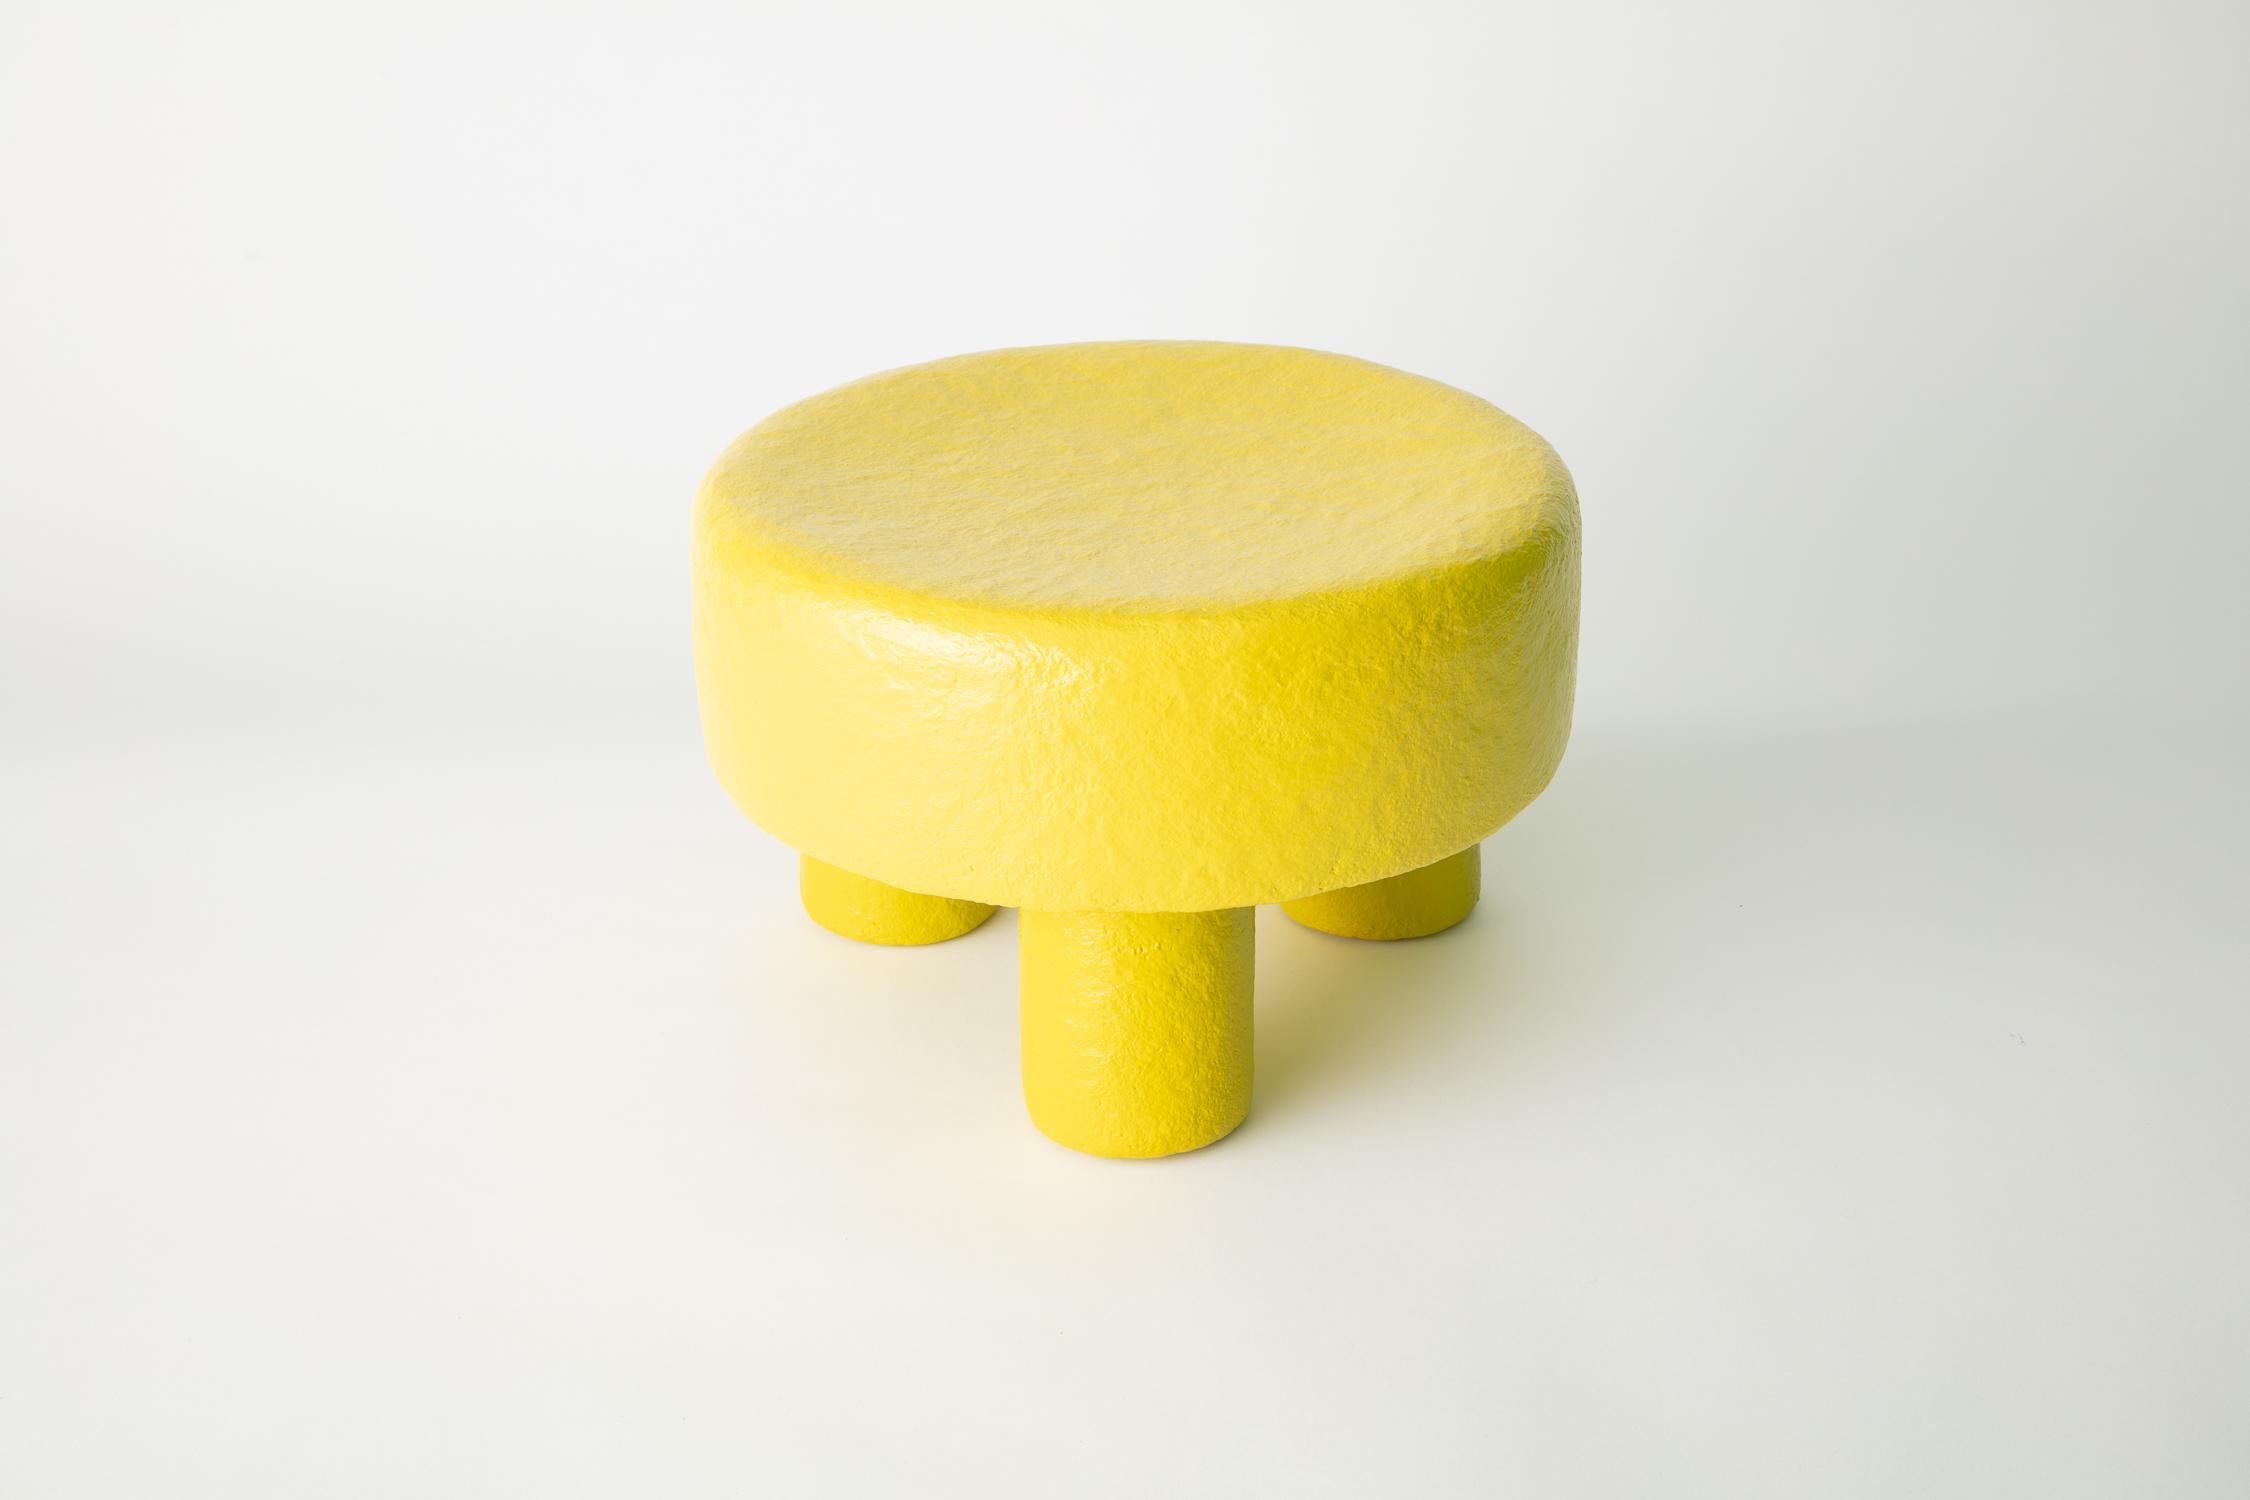 Milk stool by Chiaozza

2021

Materials: Painted paper pulp

Dimensions: H 9